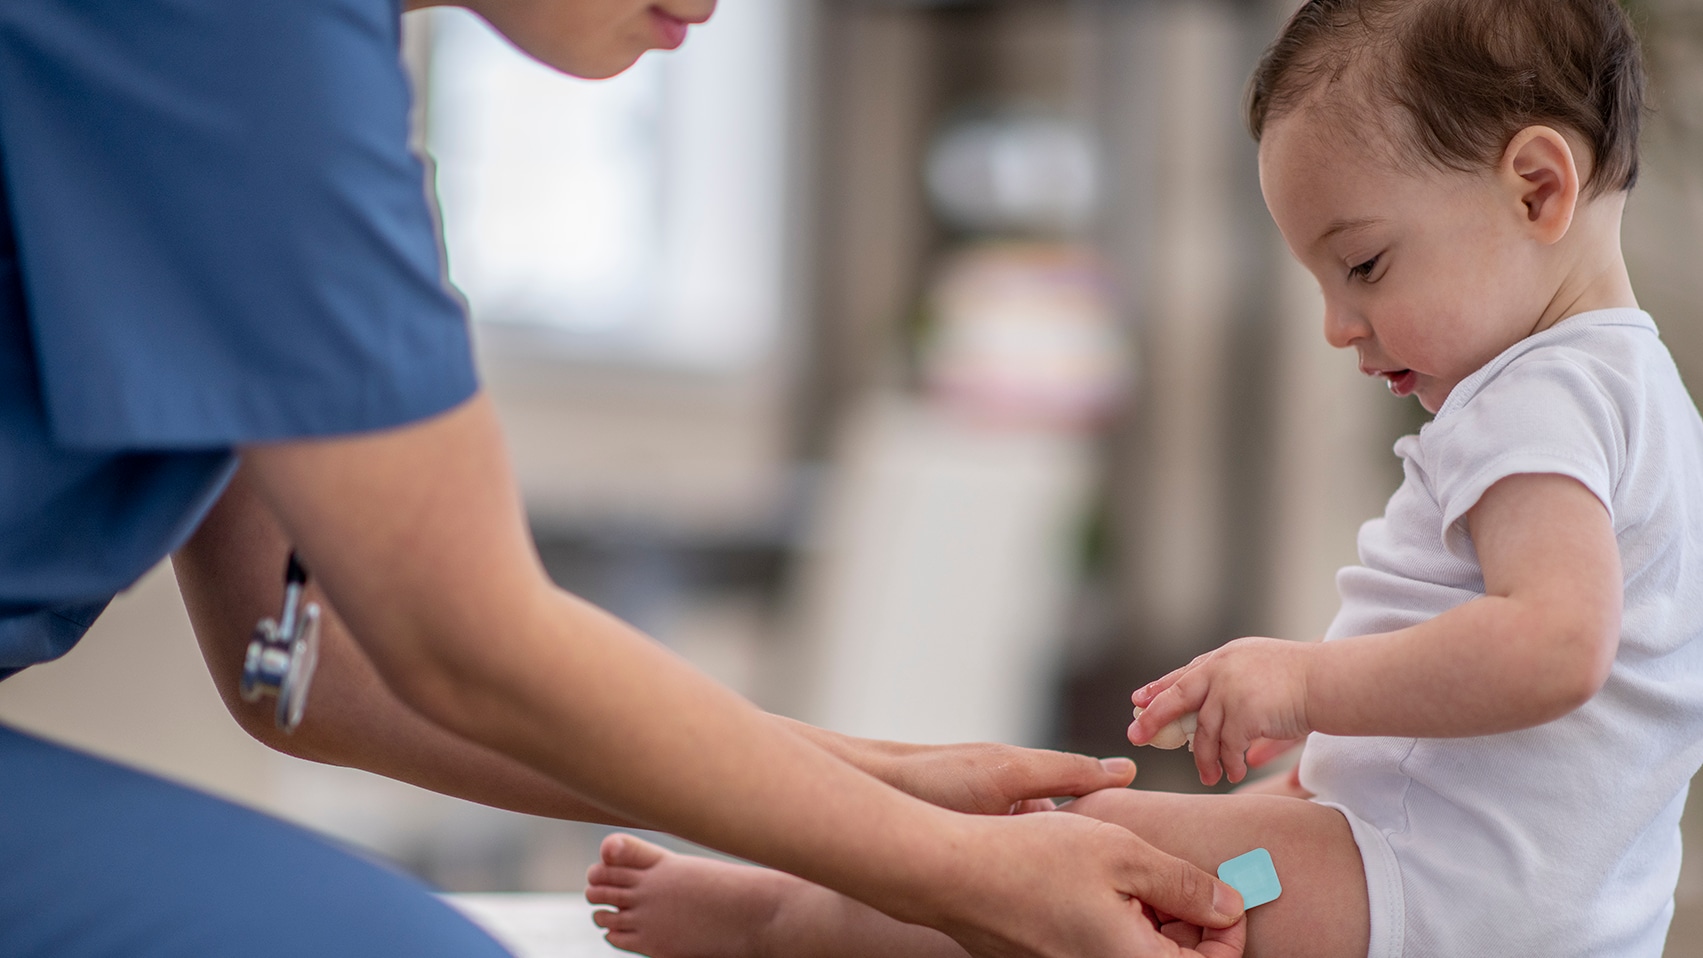 A healthcare provider places a Band-Aid on baby's thigh.